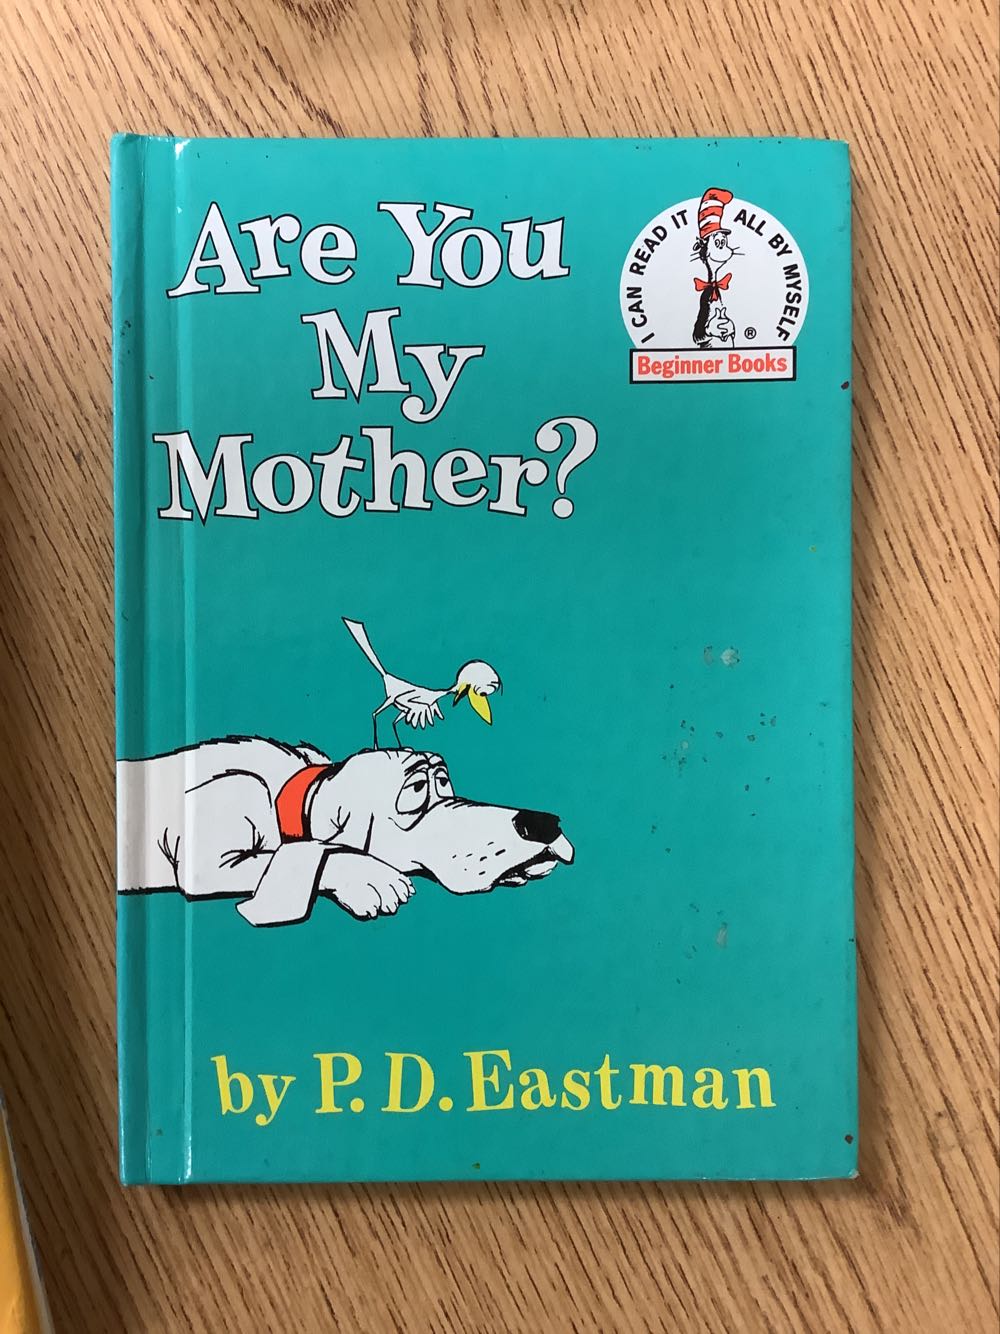 Are You My Mother? - Dr. Seuss (Random House - Hardcover) book collectible [Barcode 9780394900186] - Main Image 1